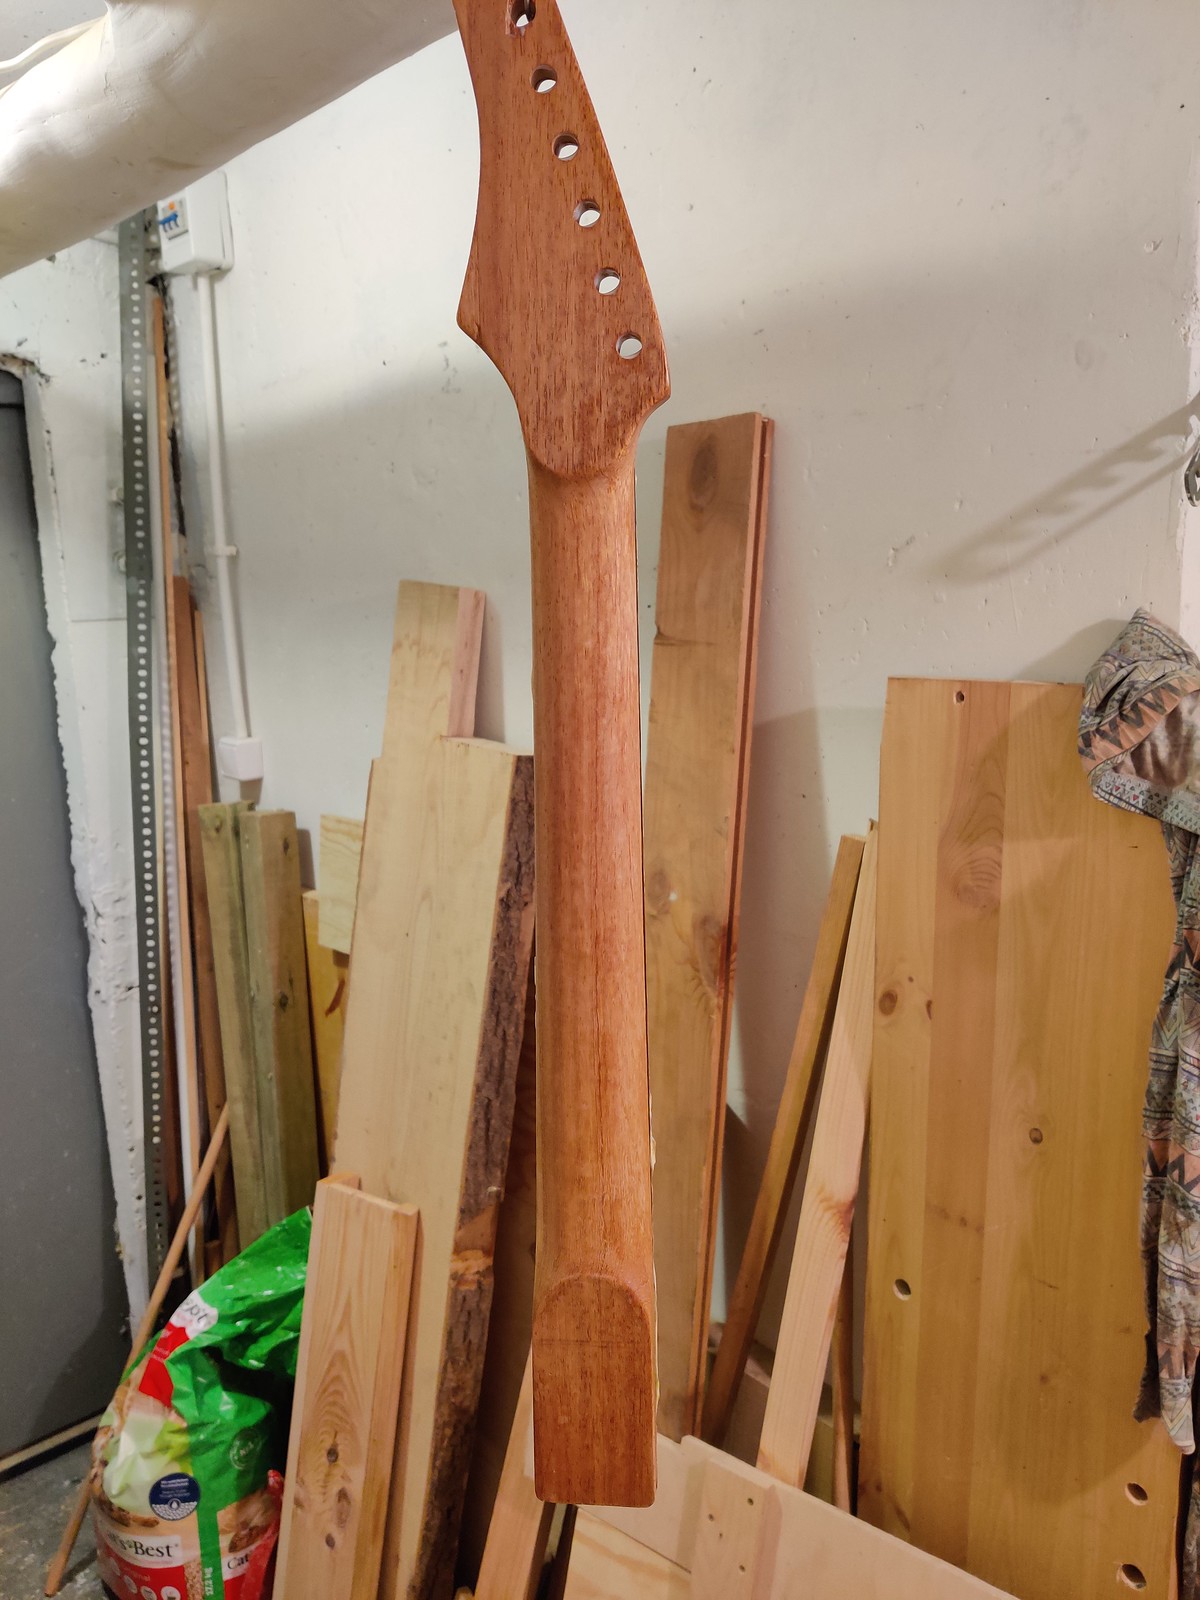 Guitar neck hanging with varnish drying